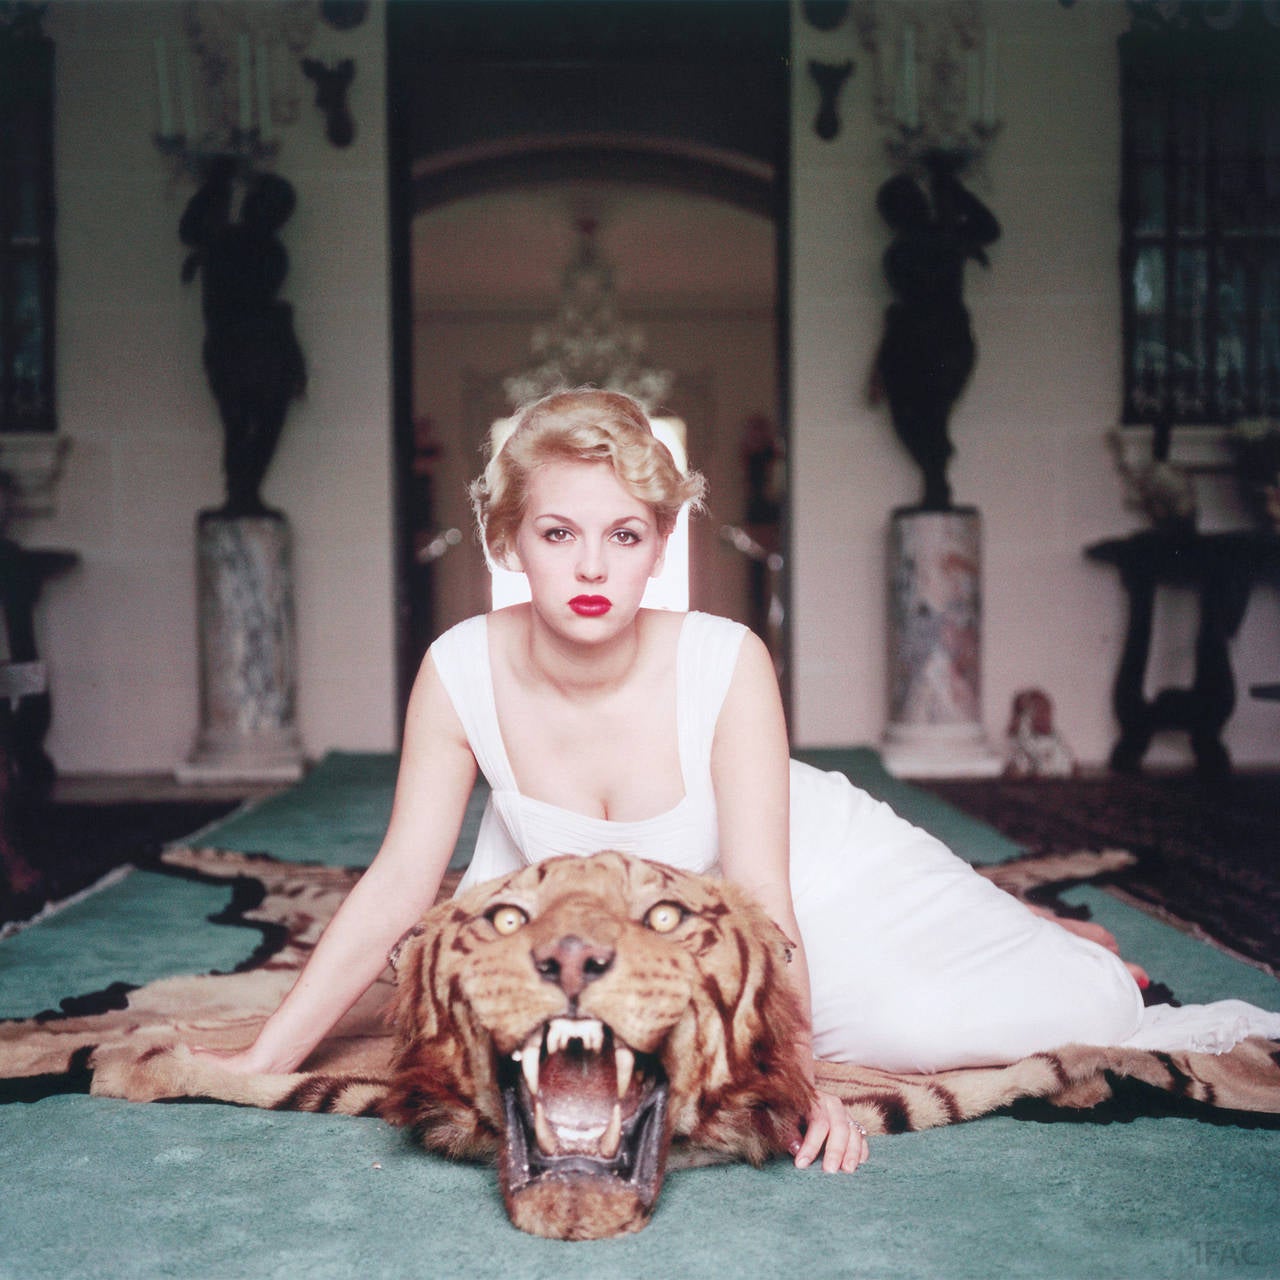 Beauty and the Beast
1959
C print
Estate stamped and hand numbered edition of 150 with certificate of authenticity from the estate. 

Lady Daphne Cameron (Mrs George Cameron) on a tiger skin rug in the trophy room at socialite Laddie Sanford's home